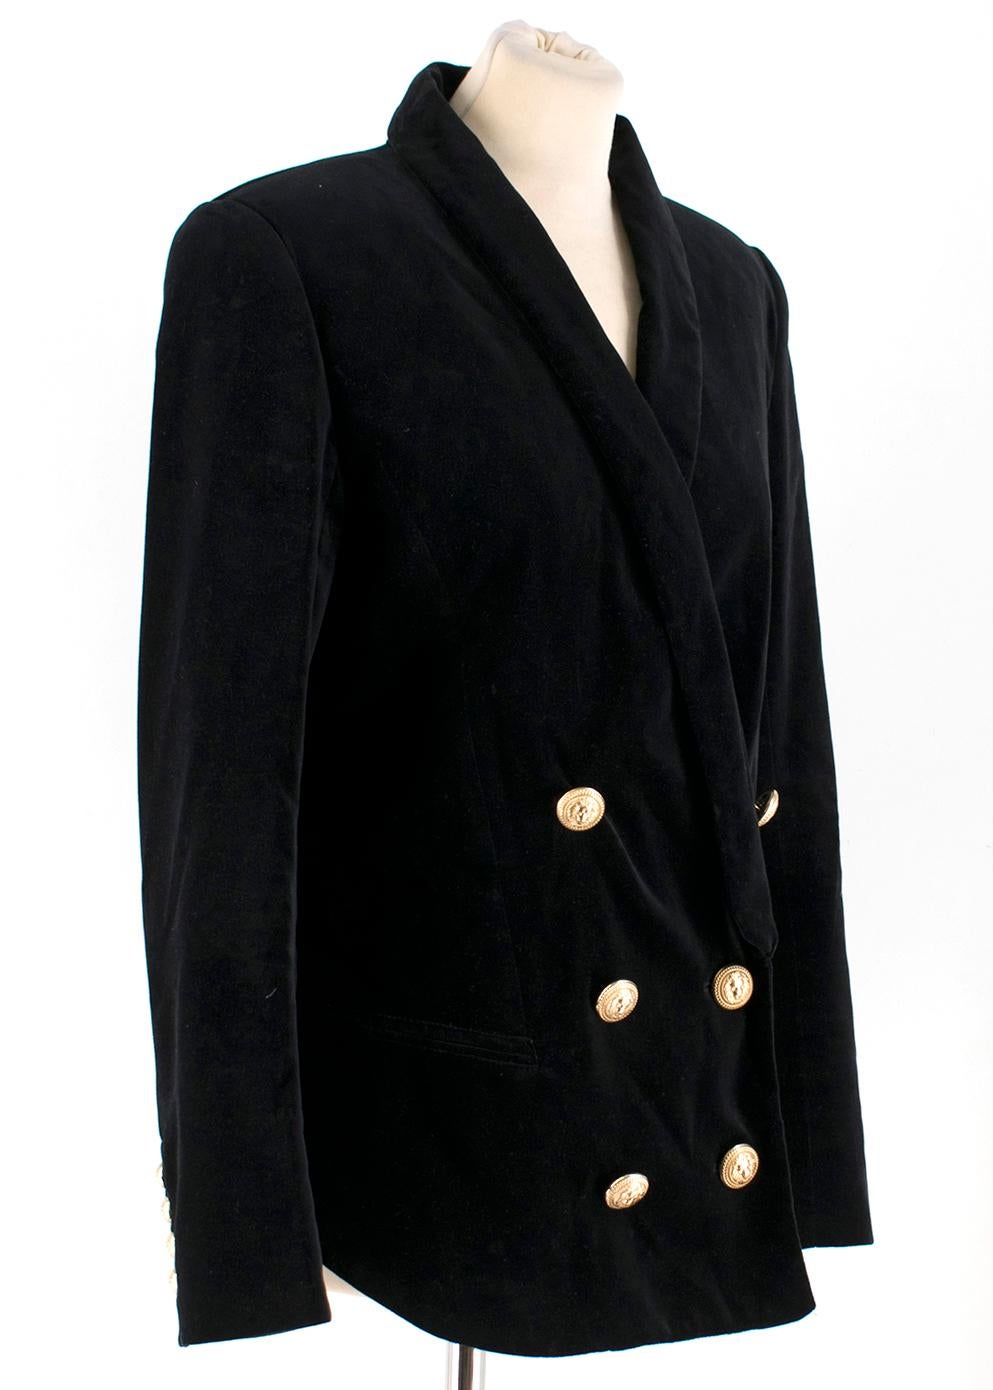 Balmain Shawl-lapel Double-breasted Velvet Blazer

- Black, wool velvet blazer
- Double- breasted buttoned fastening
- Gold-tone embossed buttons at front and cuffs
- Long-sleeved
- Padded shoulders
- Back vent
- Two front decorative pockets
-